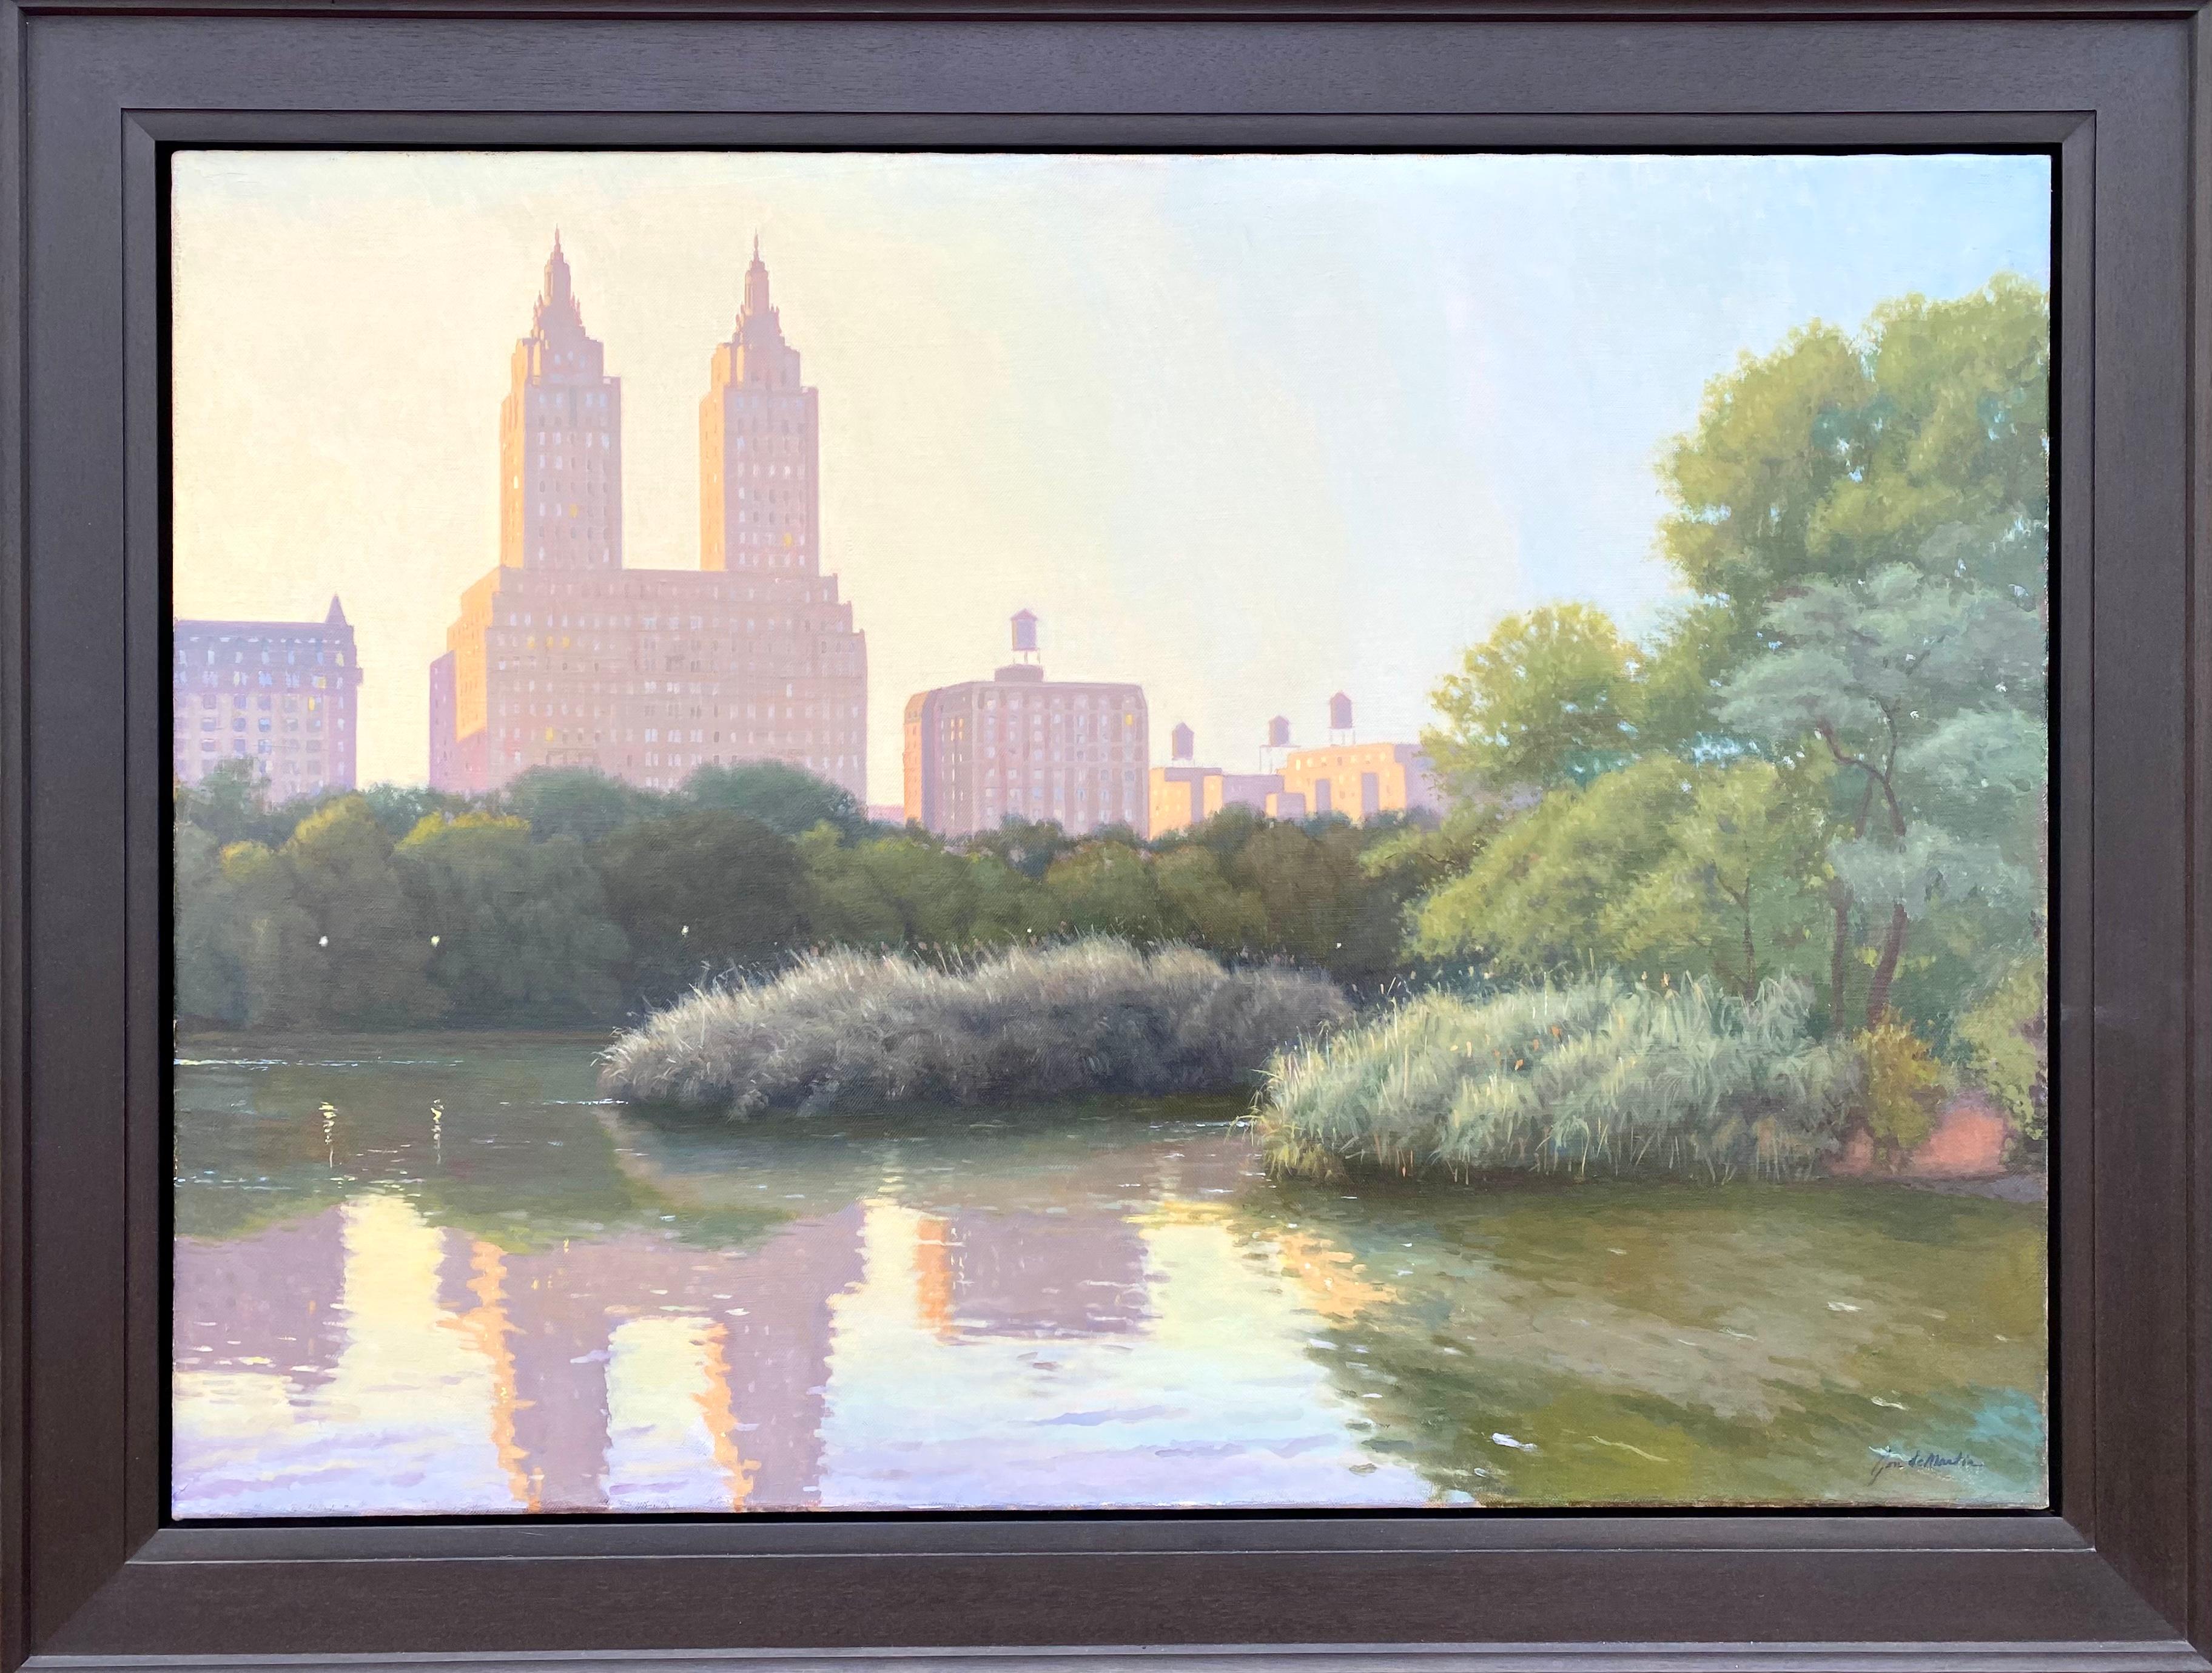 “Central Park” - Contemporary Painting by Jon deMartin